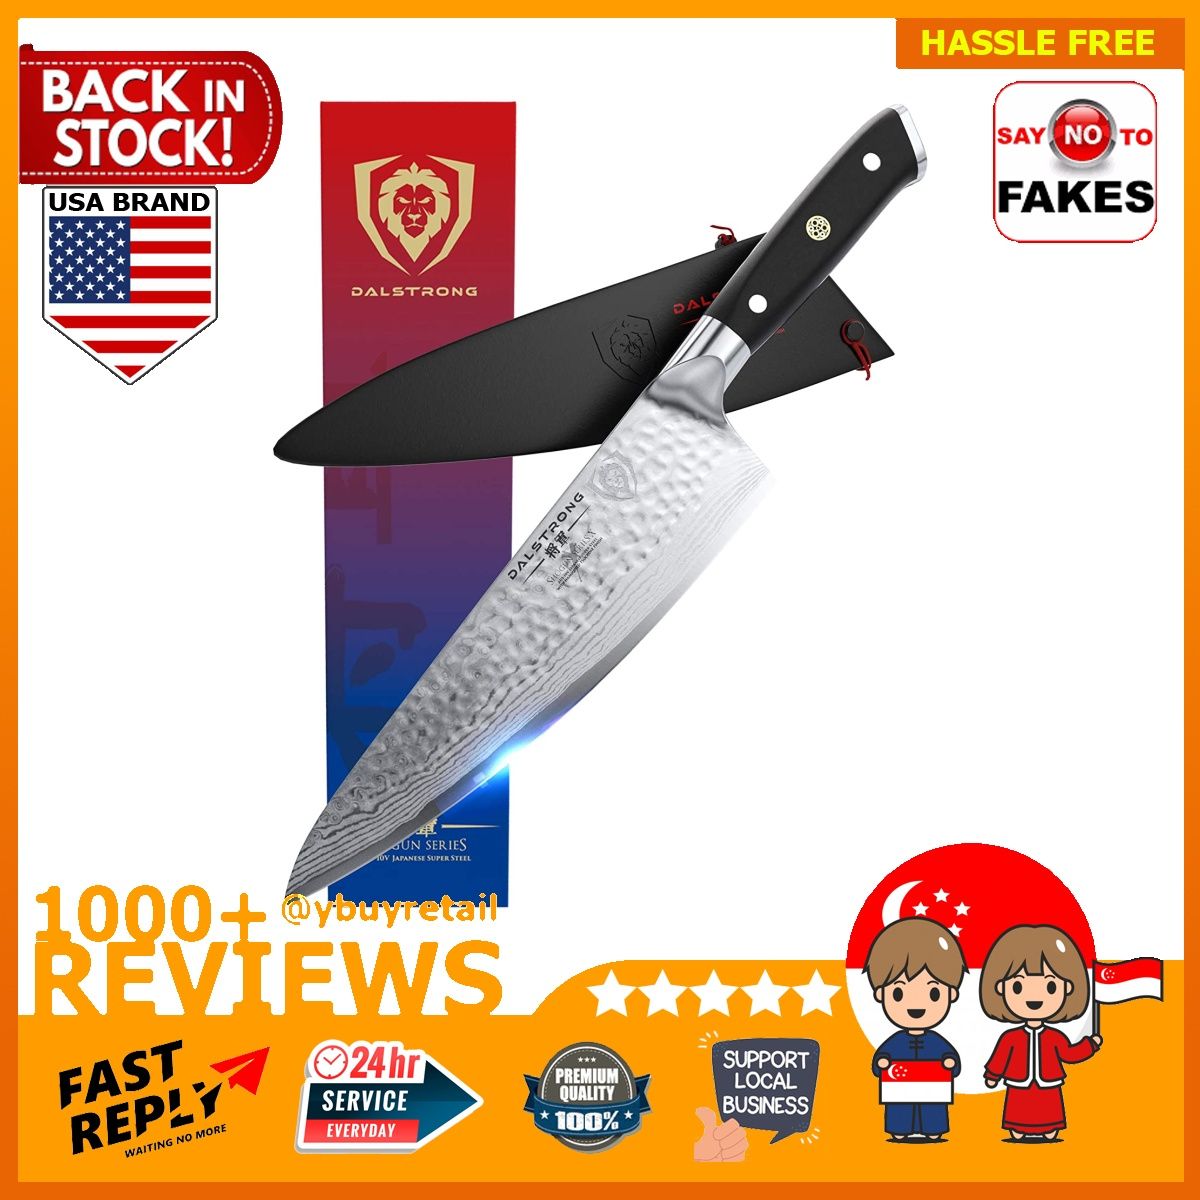 Dalstrong Small Chef's Knife - Shogun Series x Gyuto - AUS-10V (Vacuum Treated) - Hammered Finish - 6 inch - W/Guard Sheath